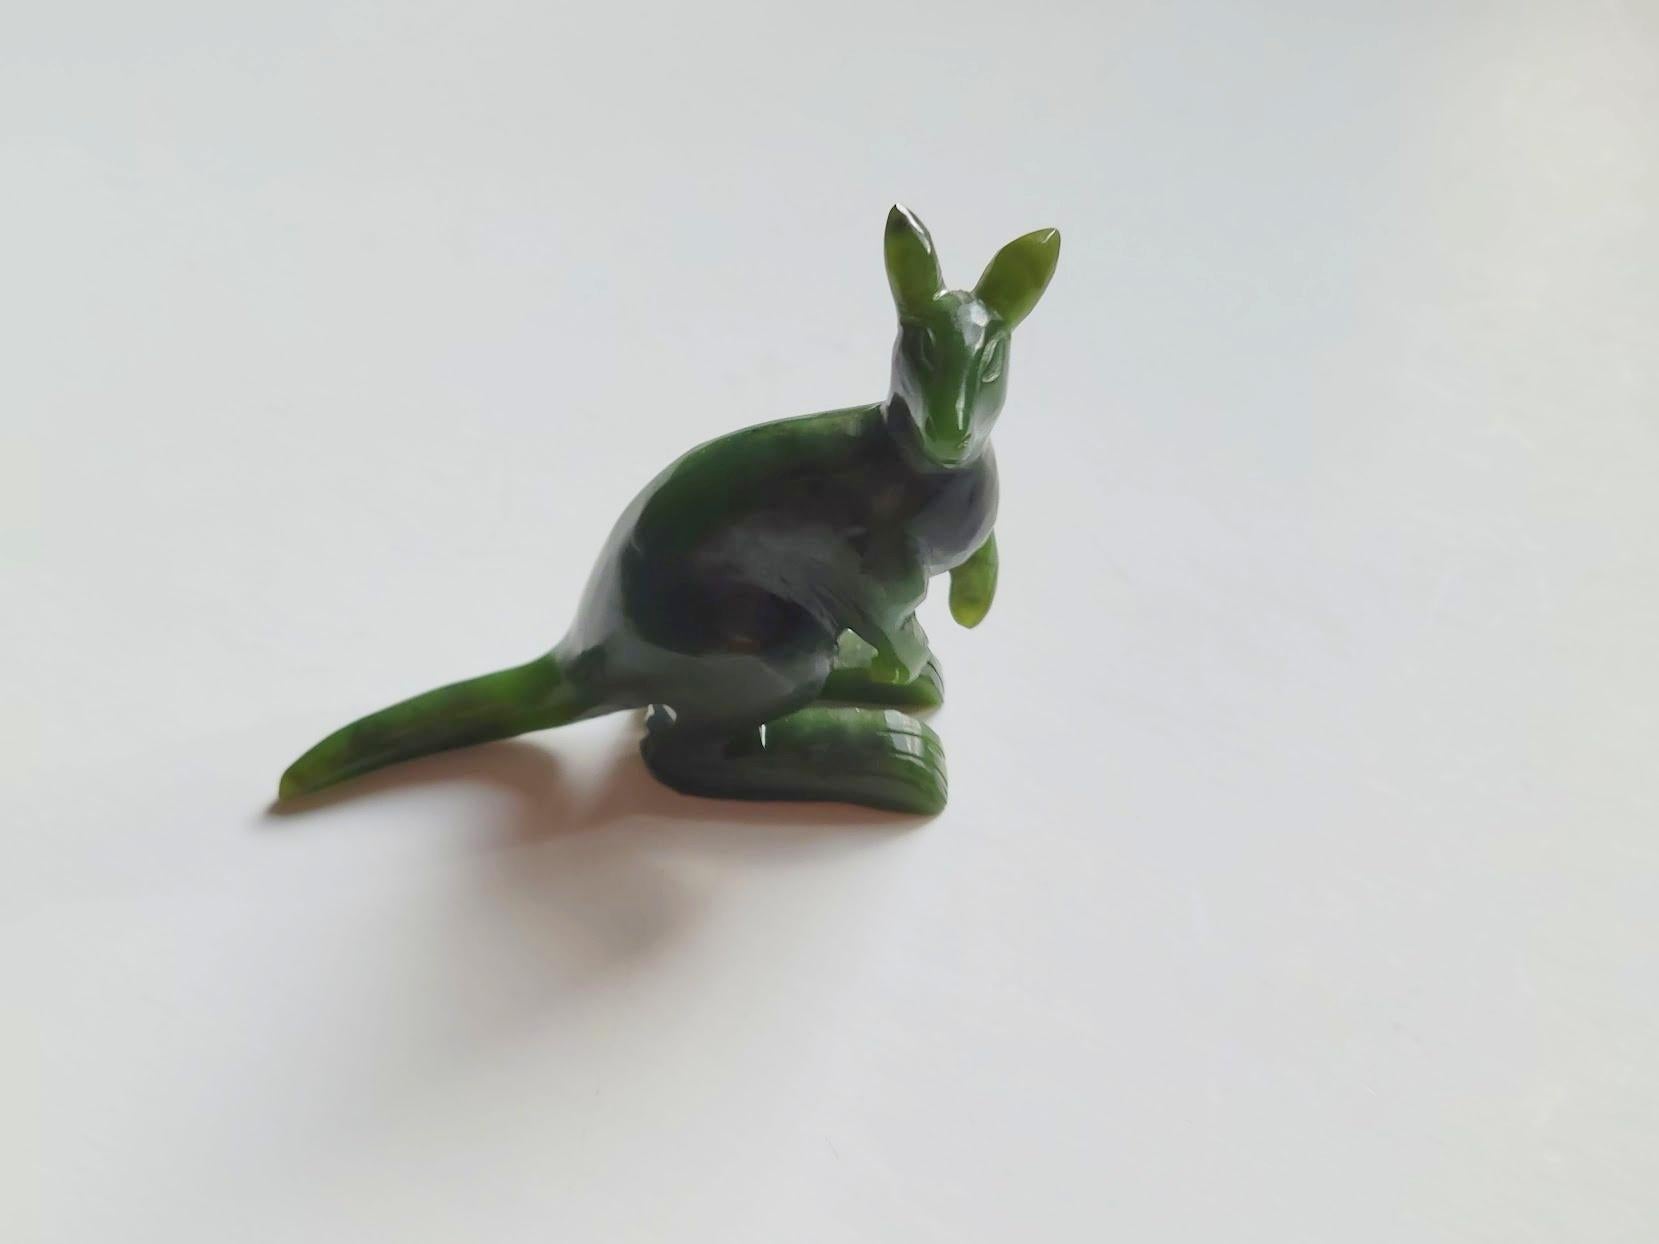 At all times, miniature figures of animals made of semi-precious stones were very popular gifts. 
This charming kangaroo is a stunning embodiment of exquisite craftsmanship, meticulously carved from Canadian nephrite and flawlessly polished.